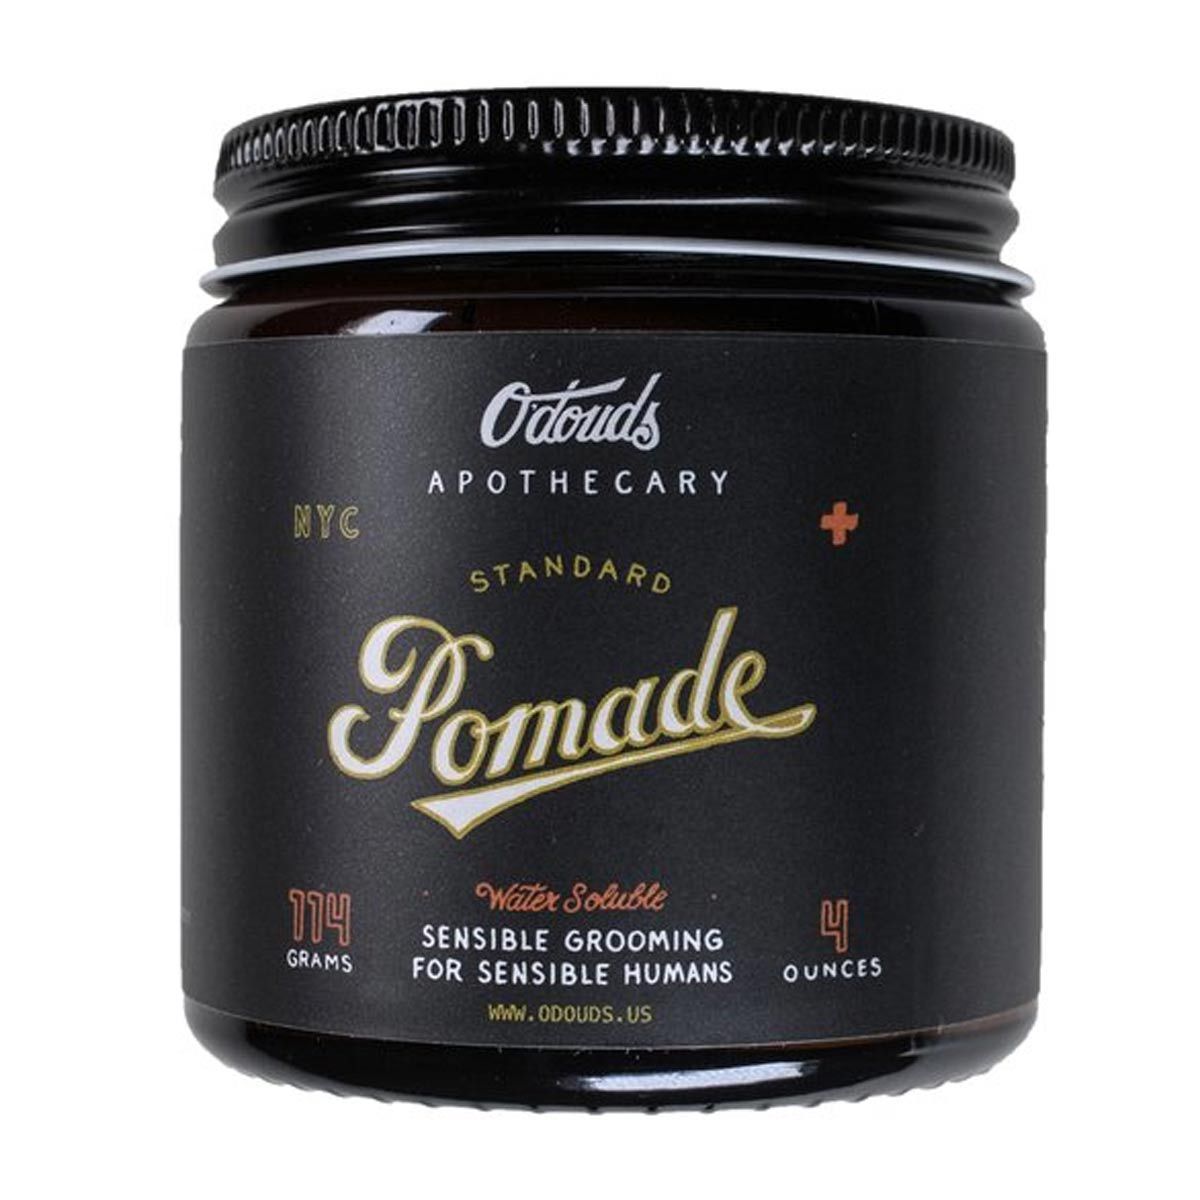 Primary image of Standard Pomade